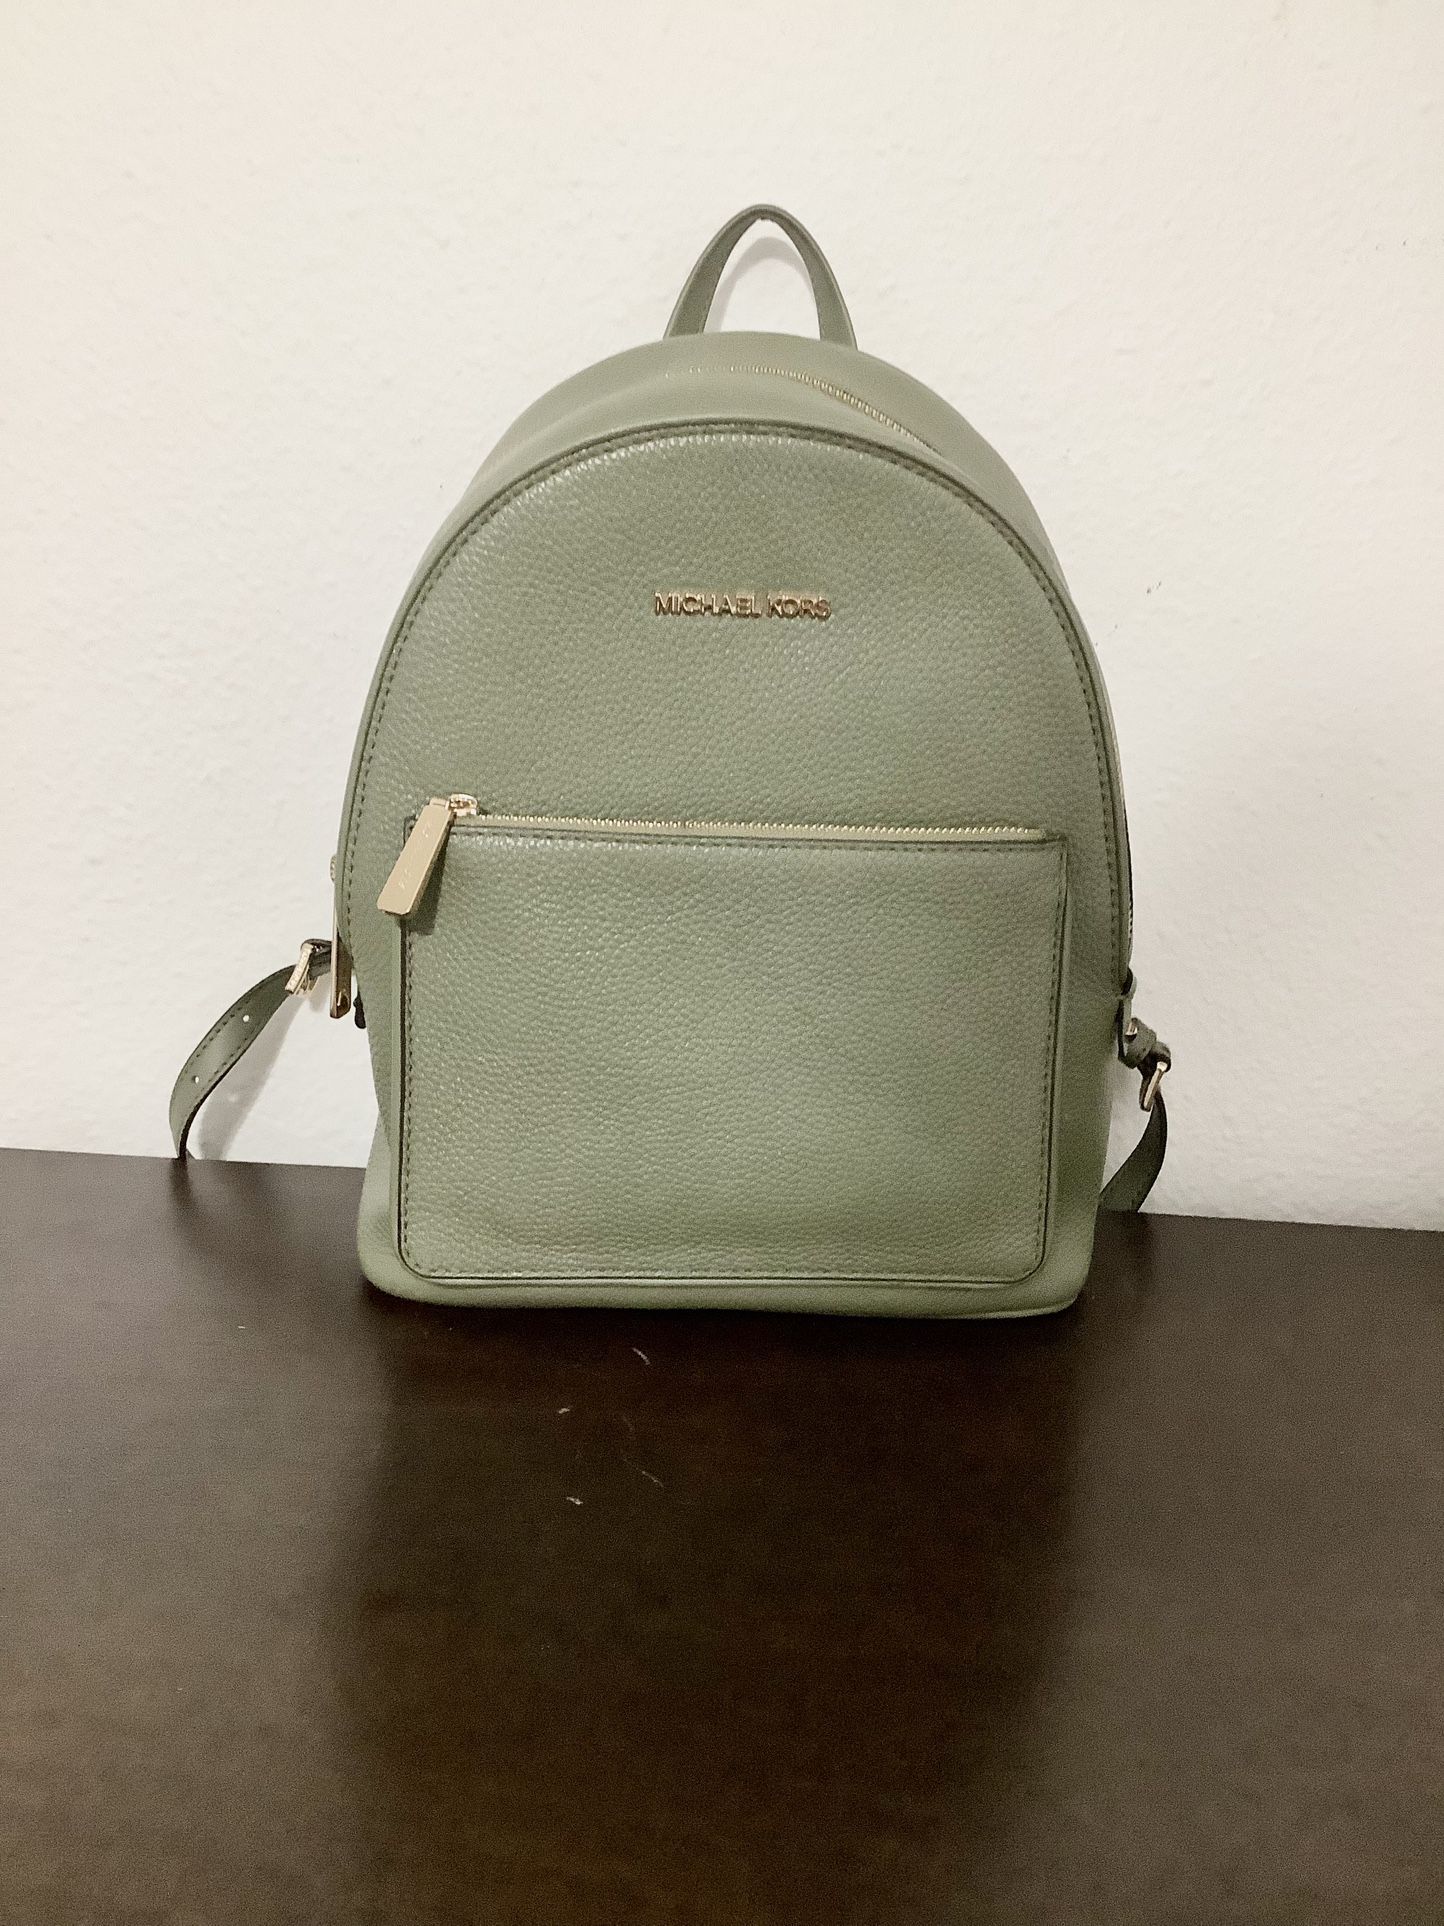 Michael Kors Adrna Army Green Backpack For Women’s Size Small for Sale in  Los Angeles, CA OfferUp